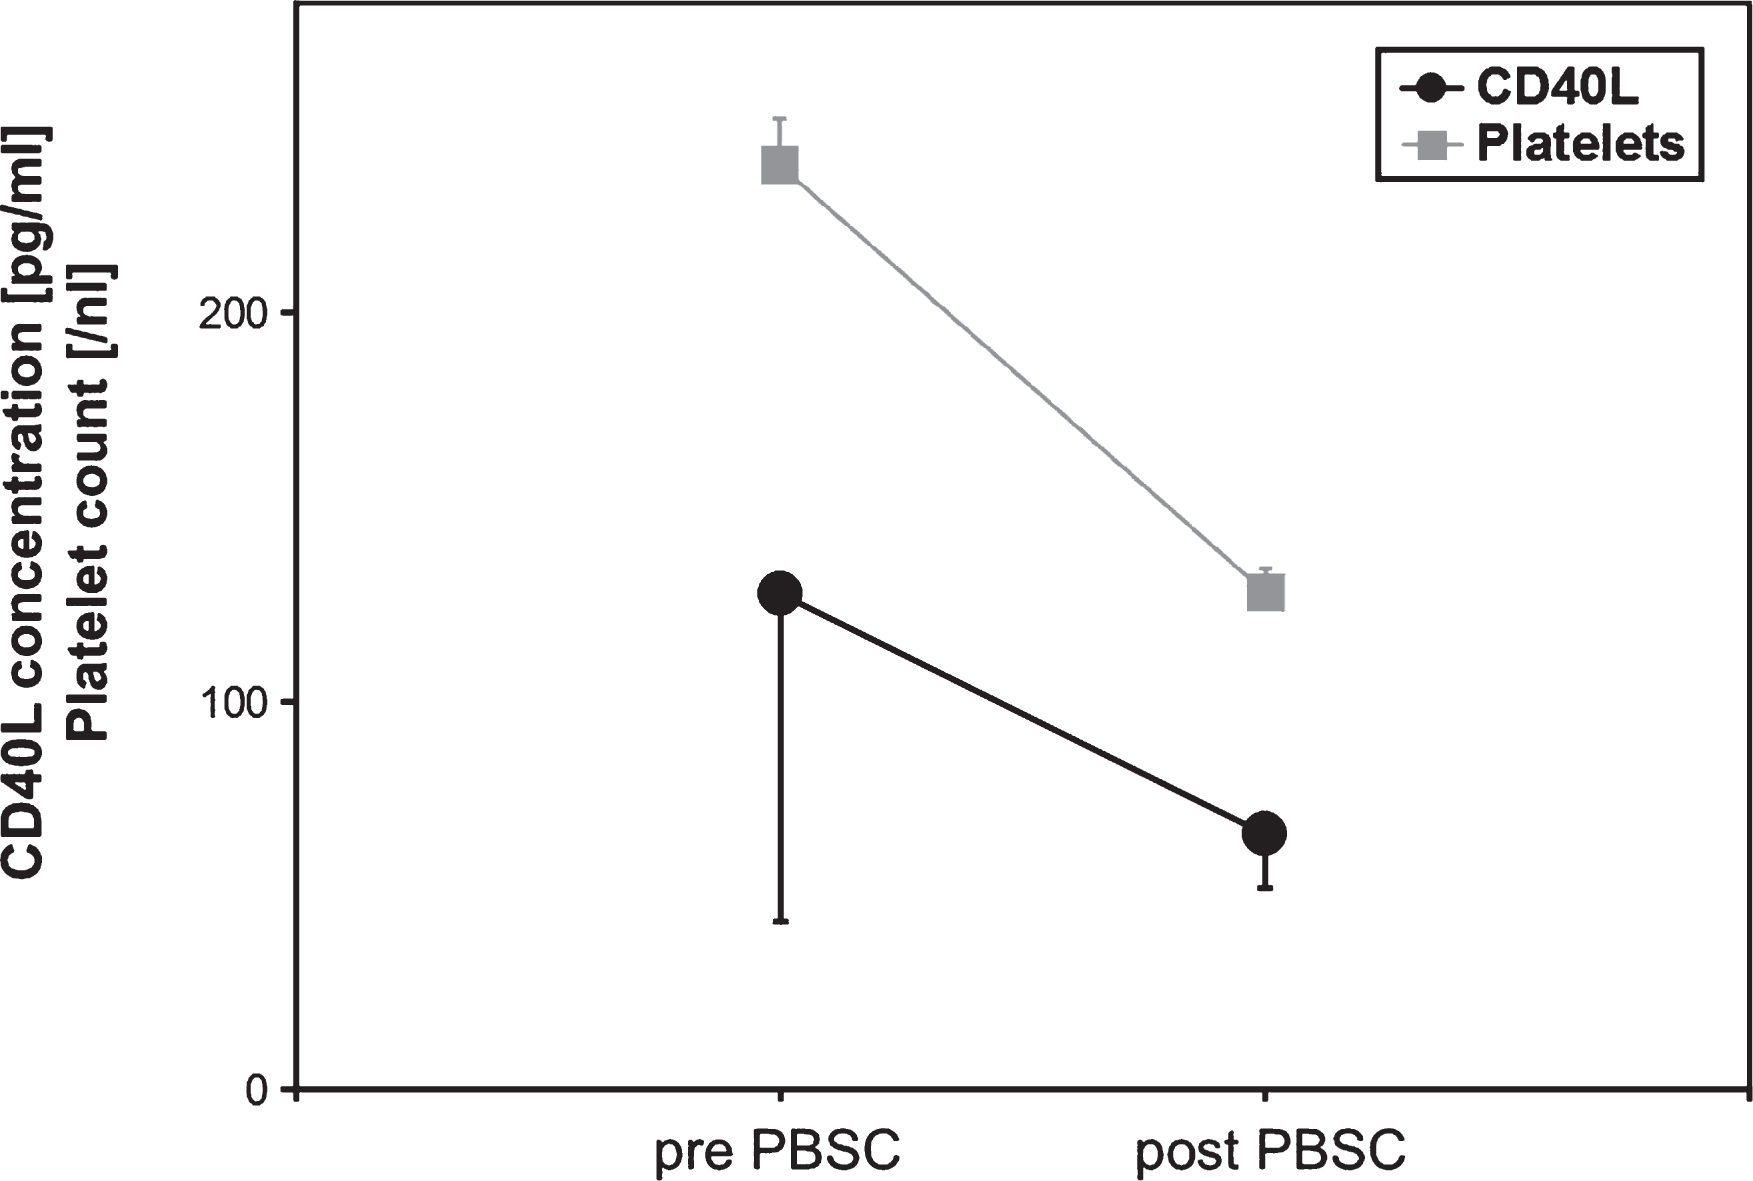 Platelet count and sCD40L concentrations in peripheral blood from allogenic PBSC donors (n = 6) during stem cell apheresis. Data are given as mean±SEM.